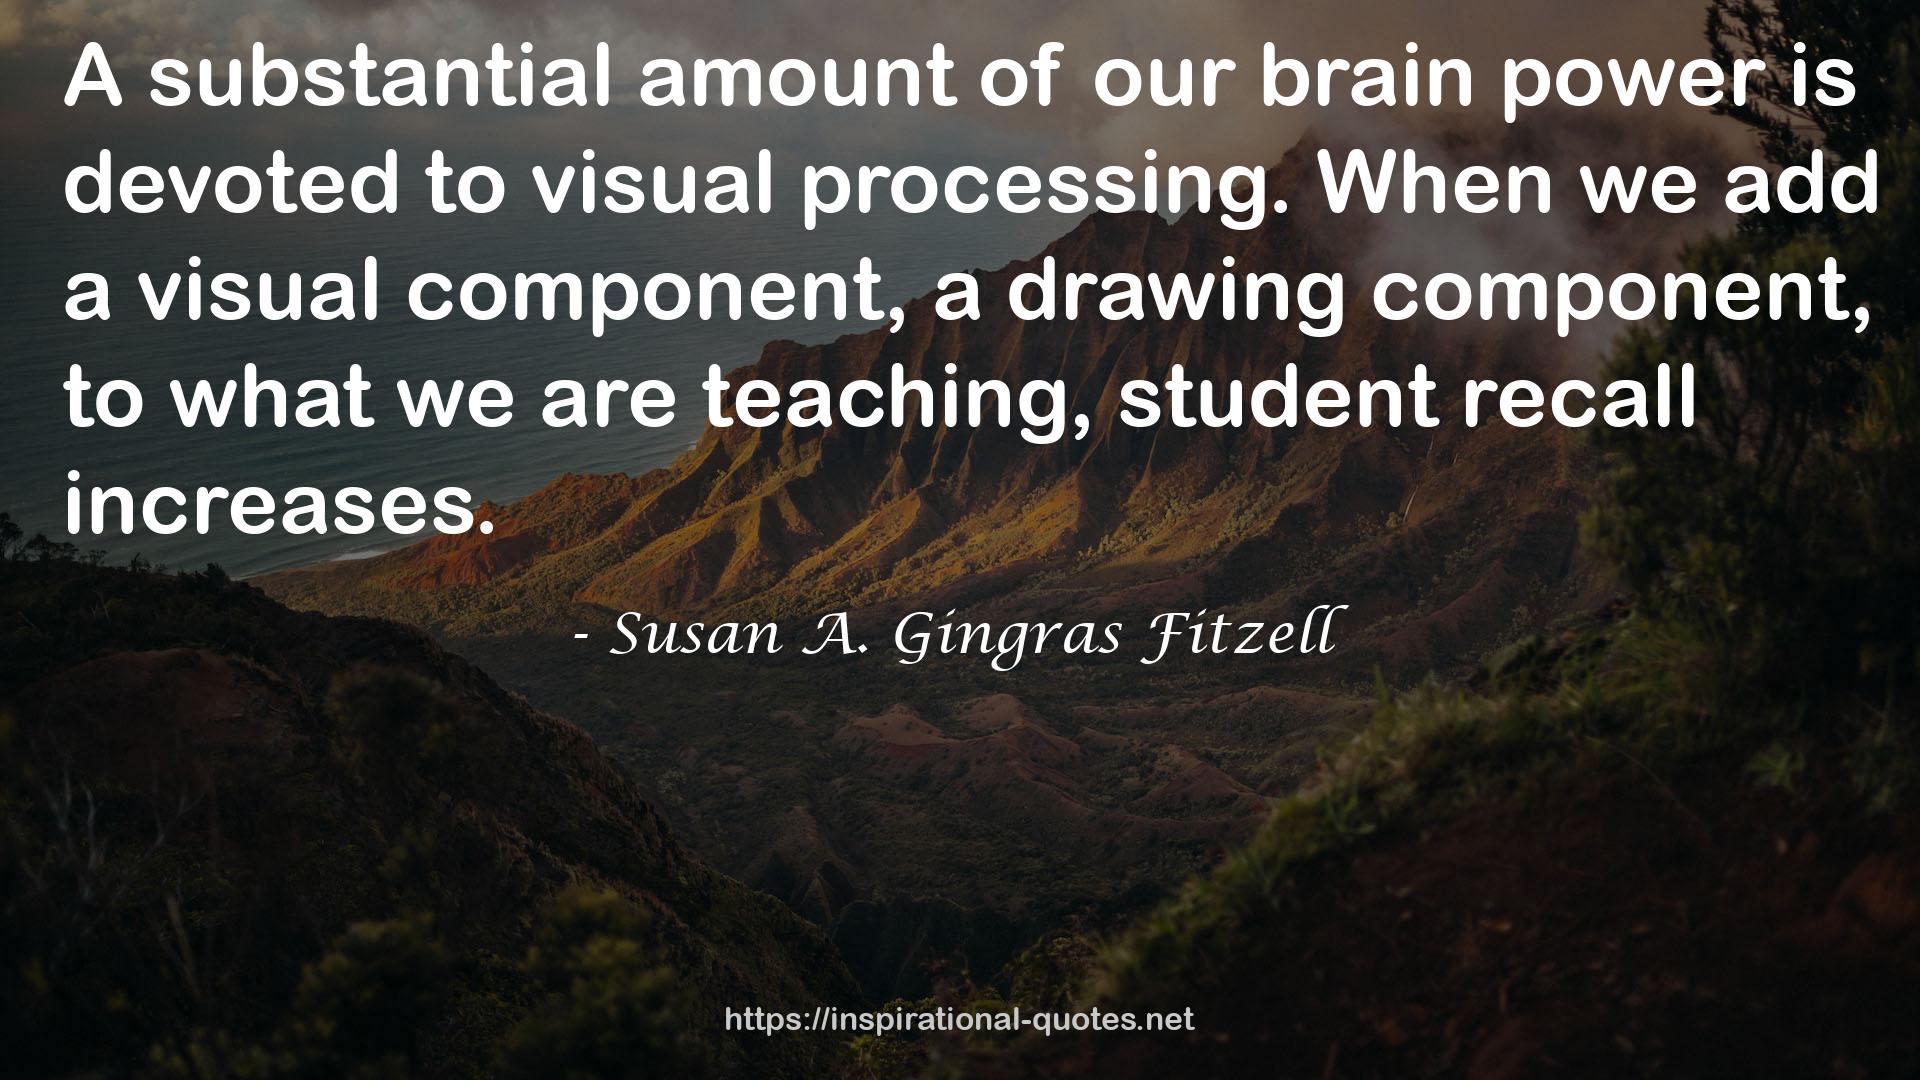 Susan A. Gingras Fitzell QUOTES